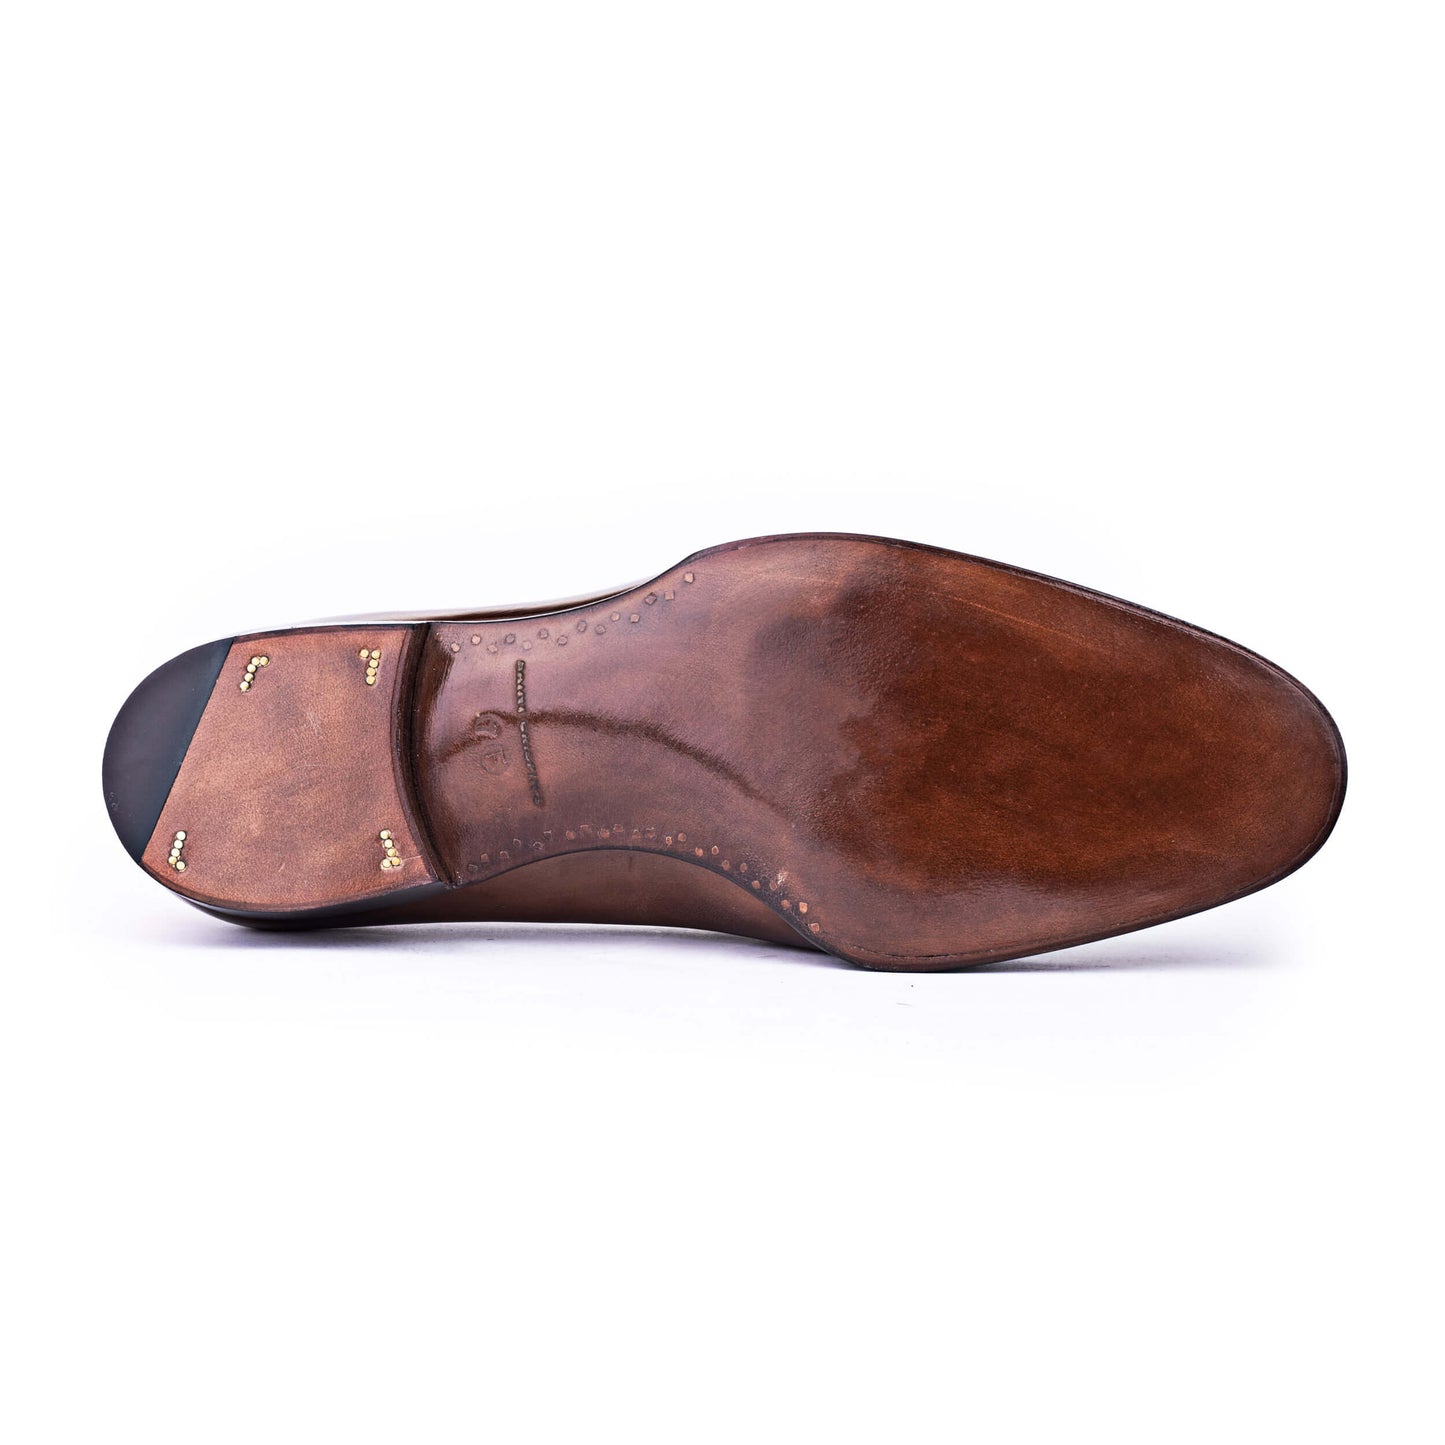 Plain Loafer in mid brown Crust calf leather